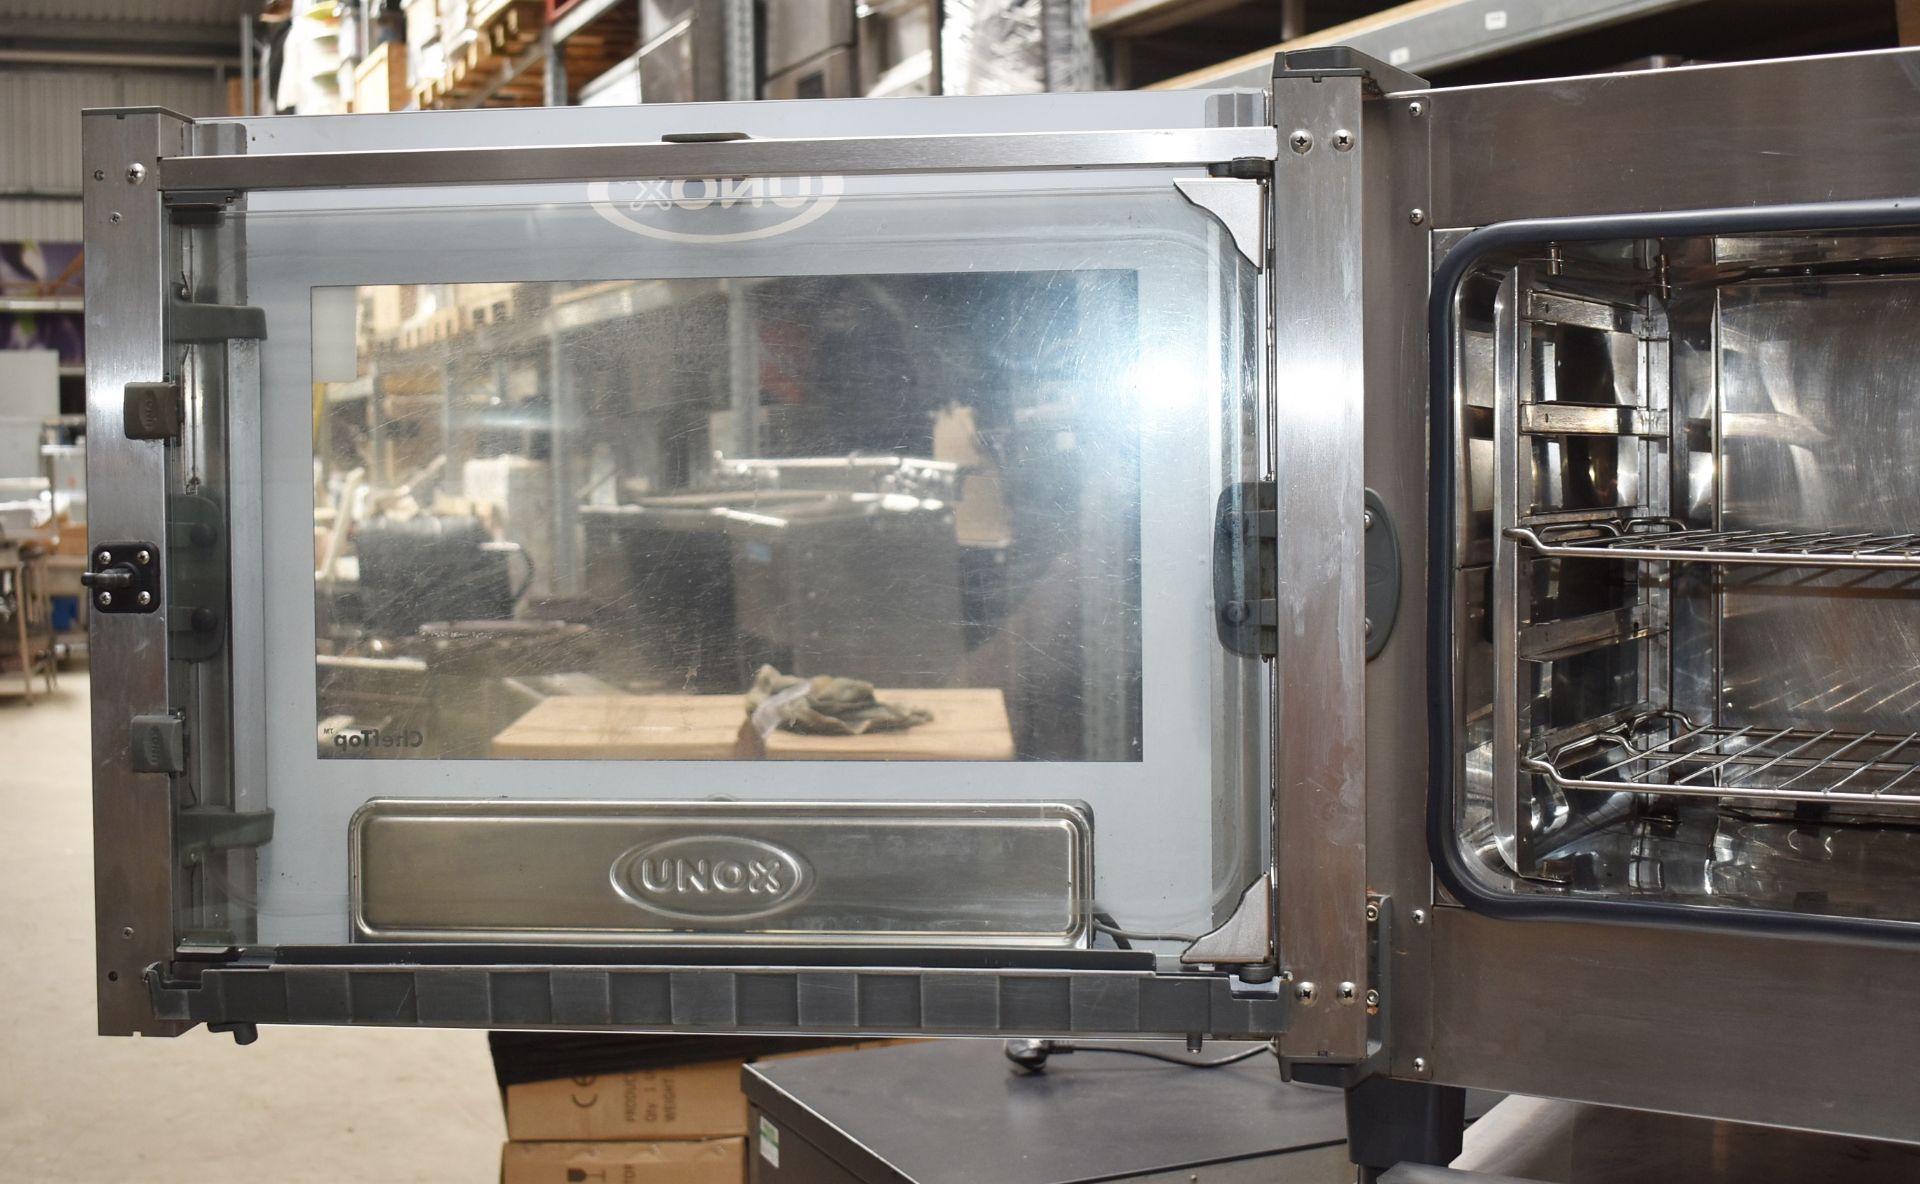 1 x Unox ChefTop XVL385 Commercial 3 Phase Double Oven For Slow Cooking Meats, Proving Dough & More - Image 18 of 26